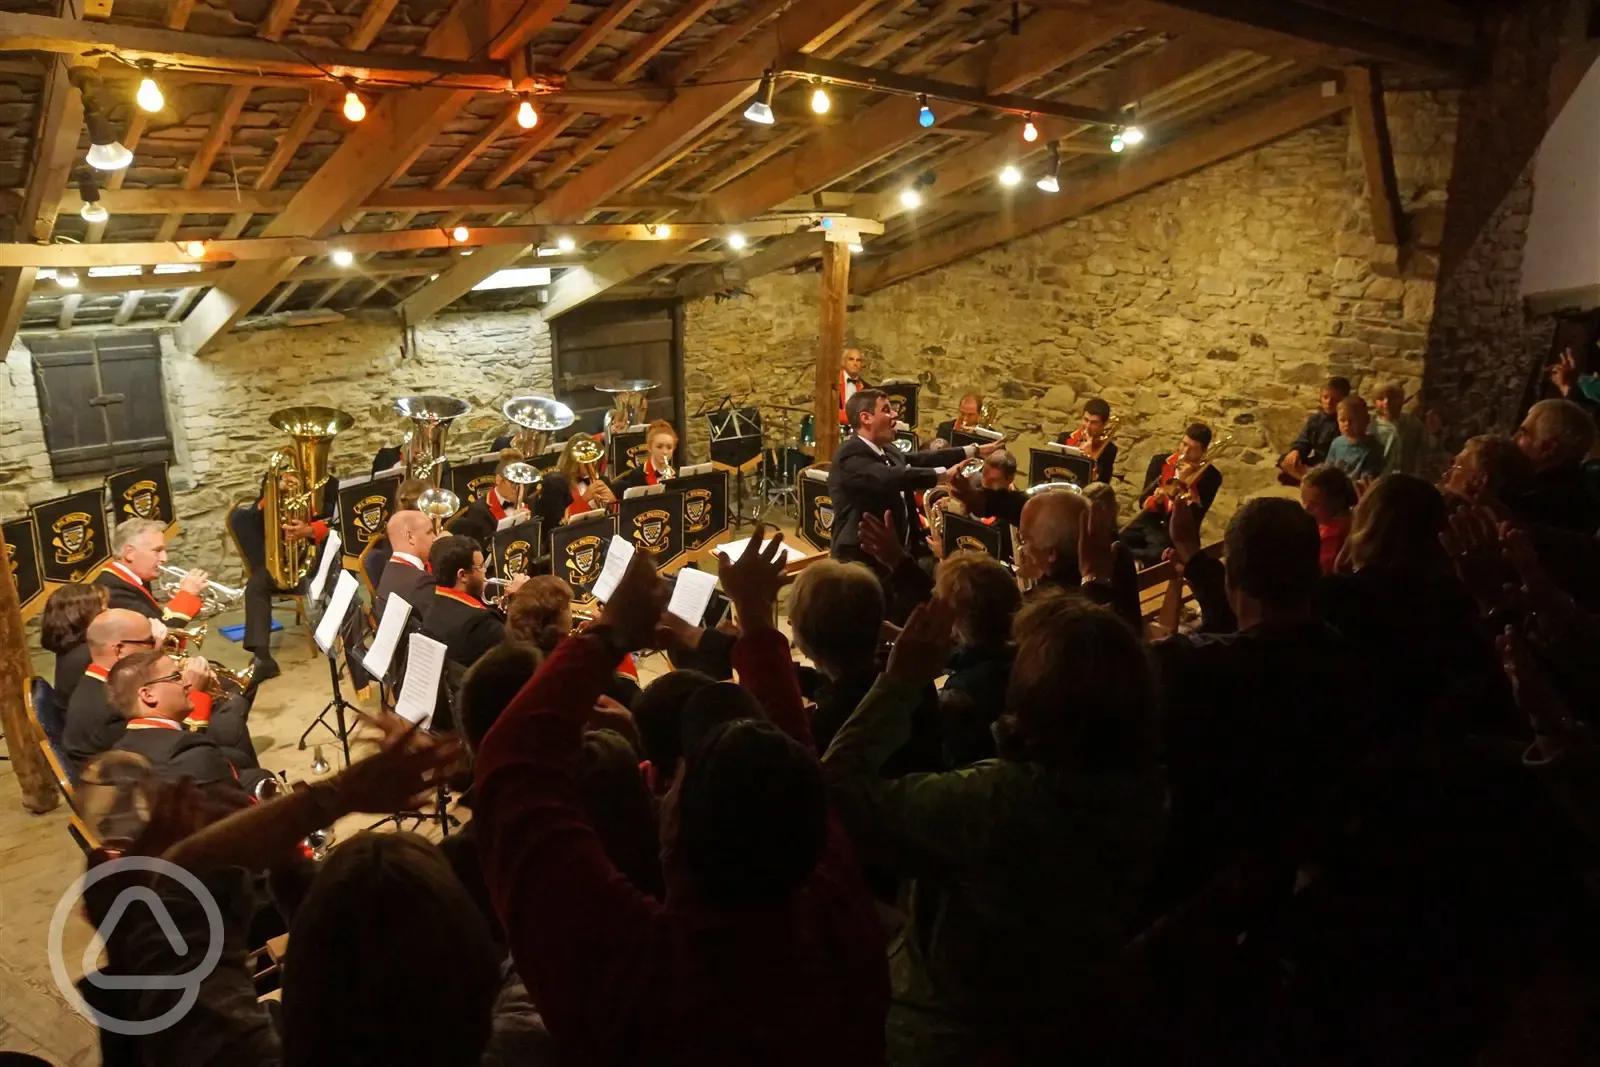 Brass band playing in the Old Barn